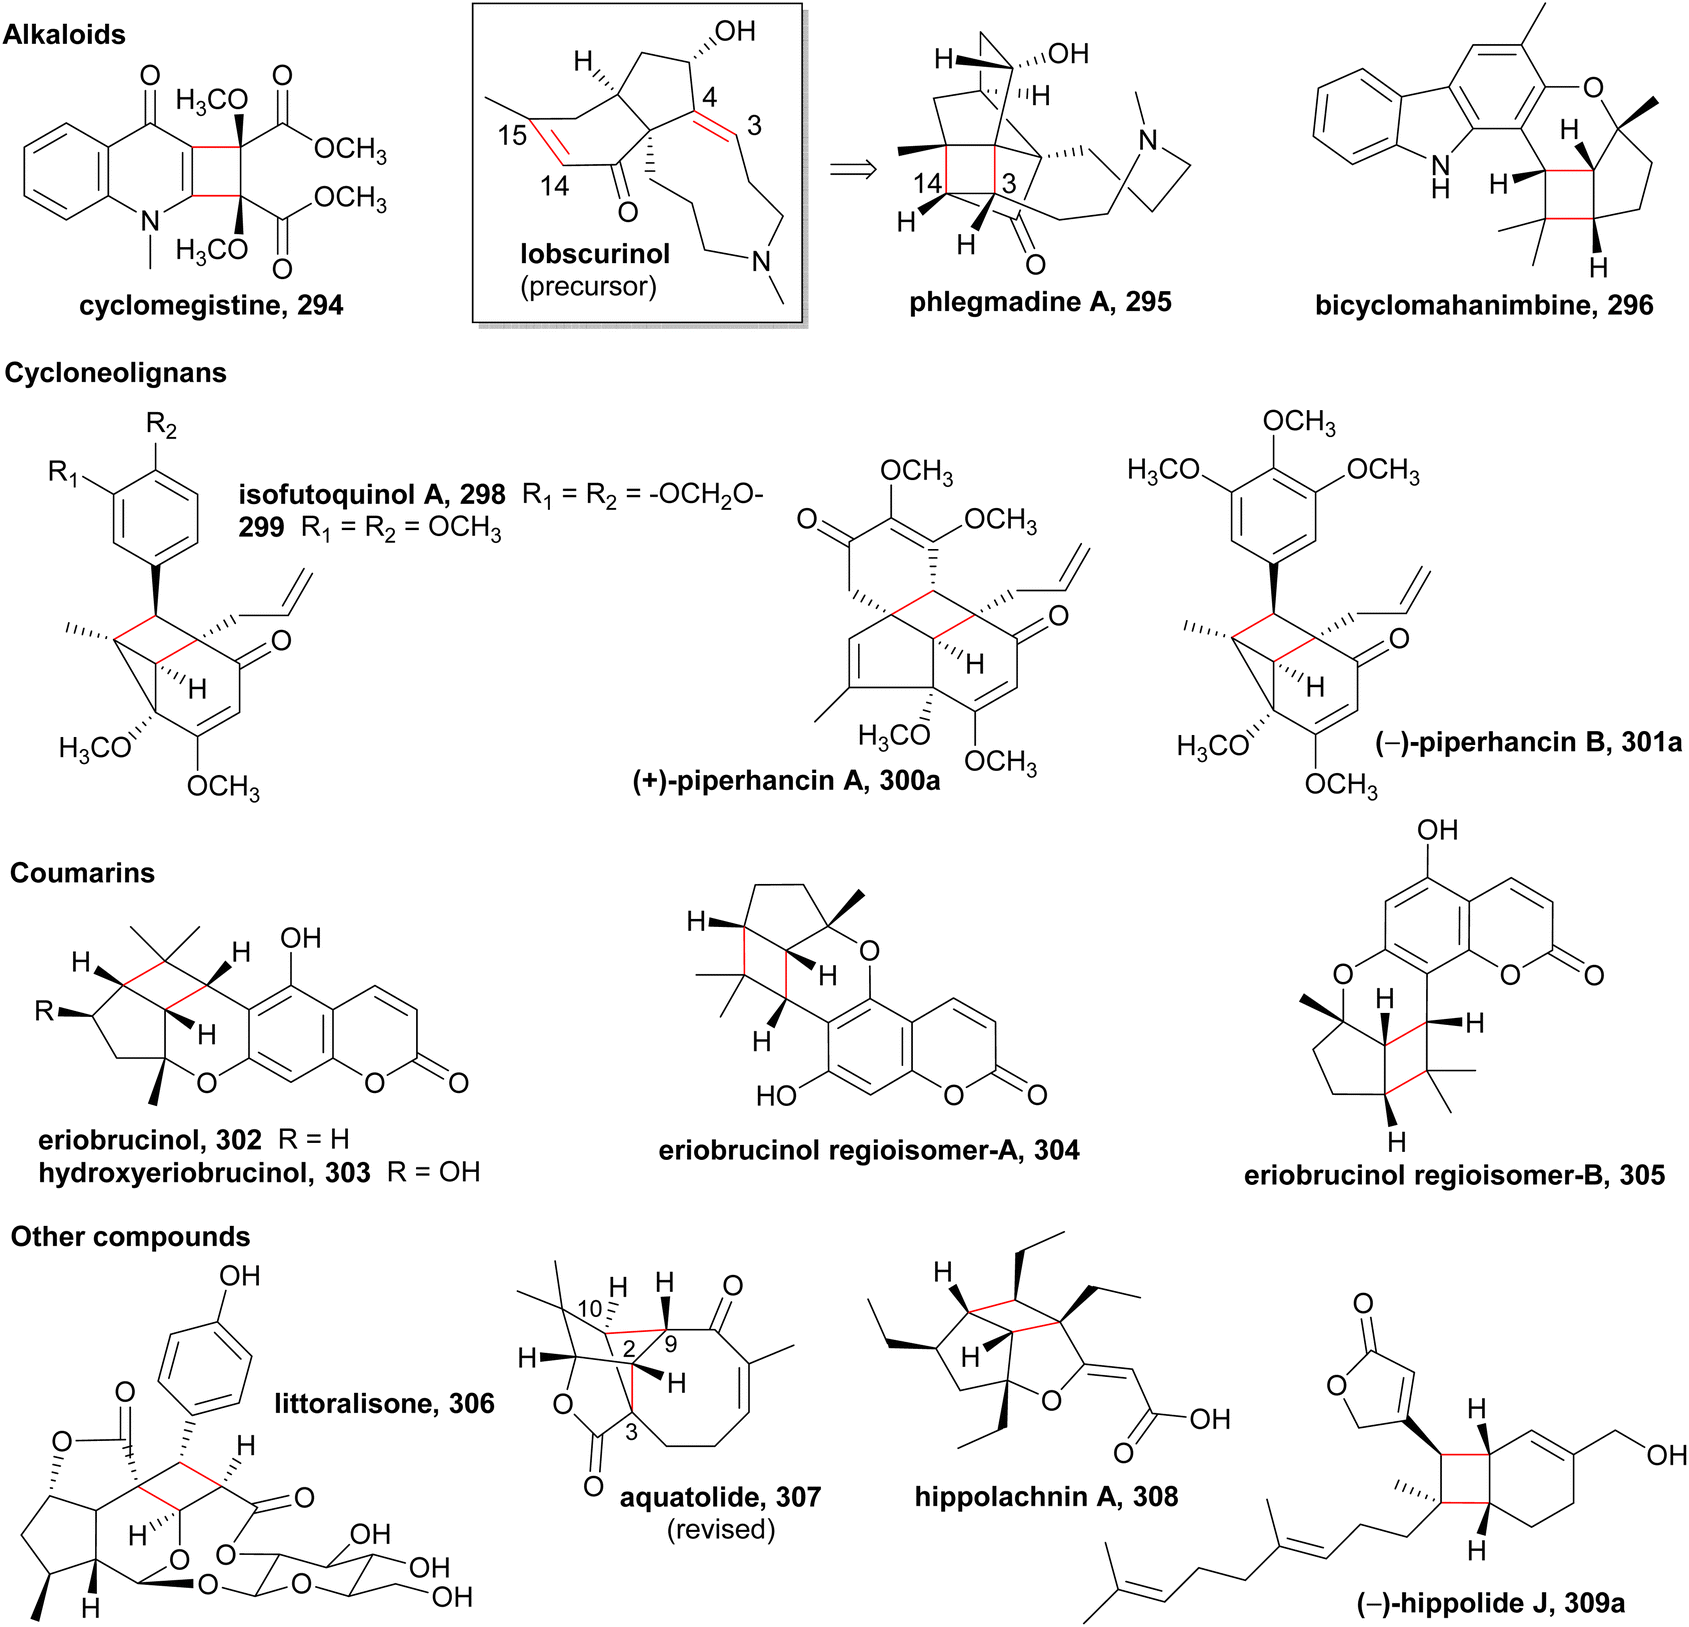 2 + 2]-Cycloaddition-derived cyclobutane natural products 